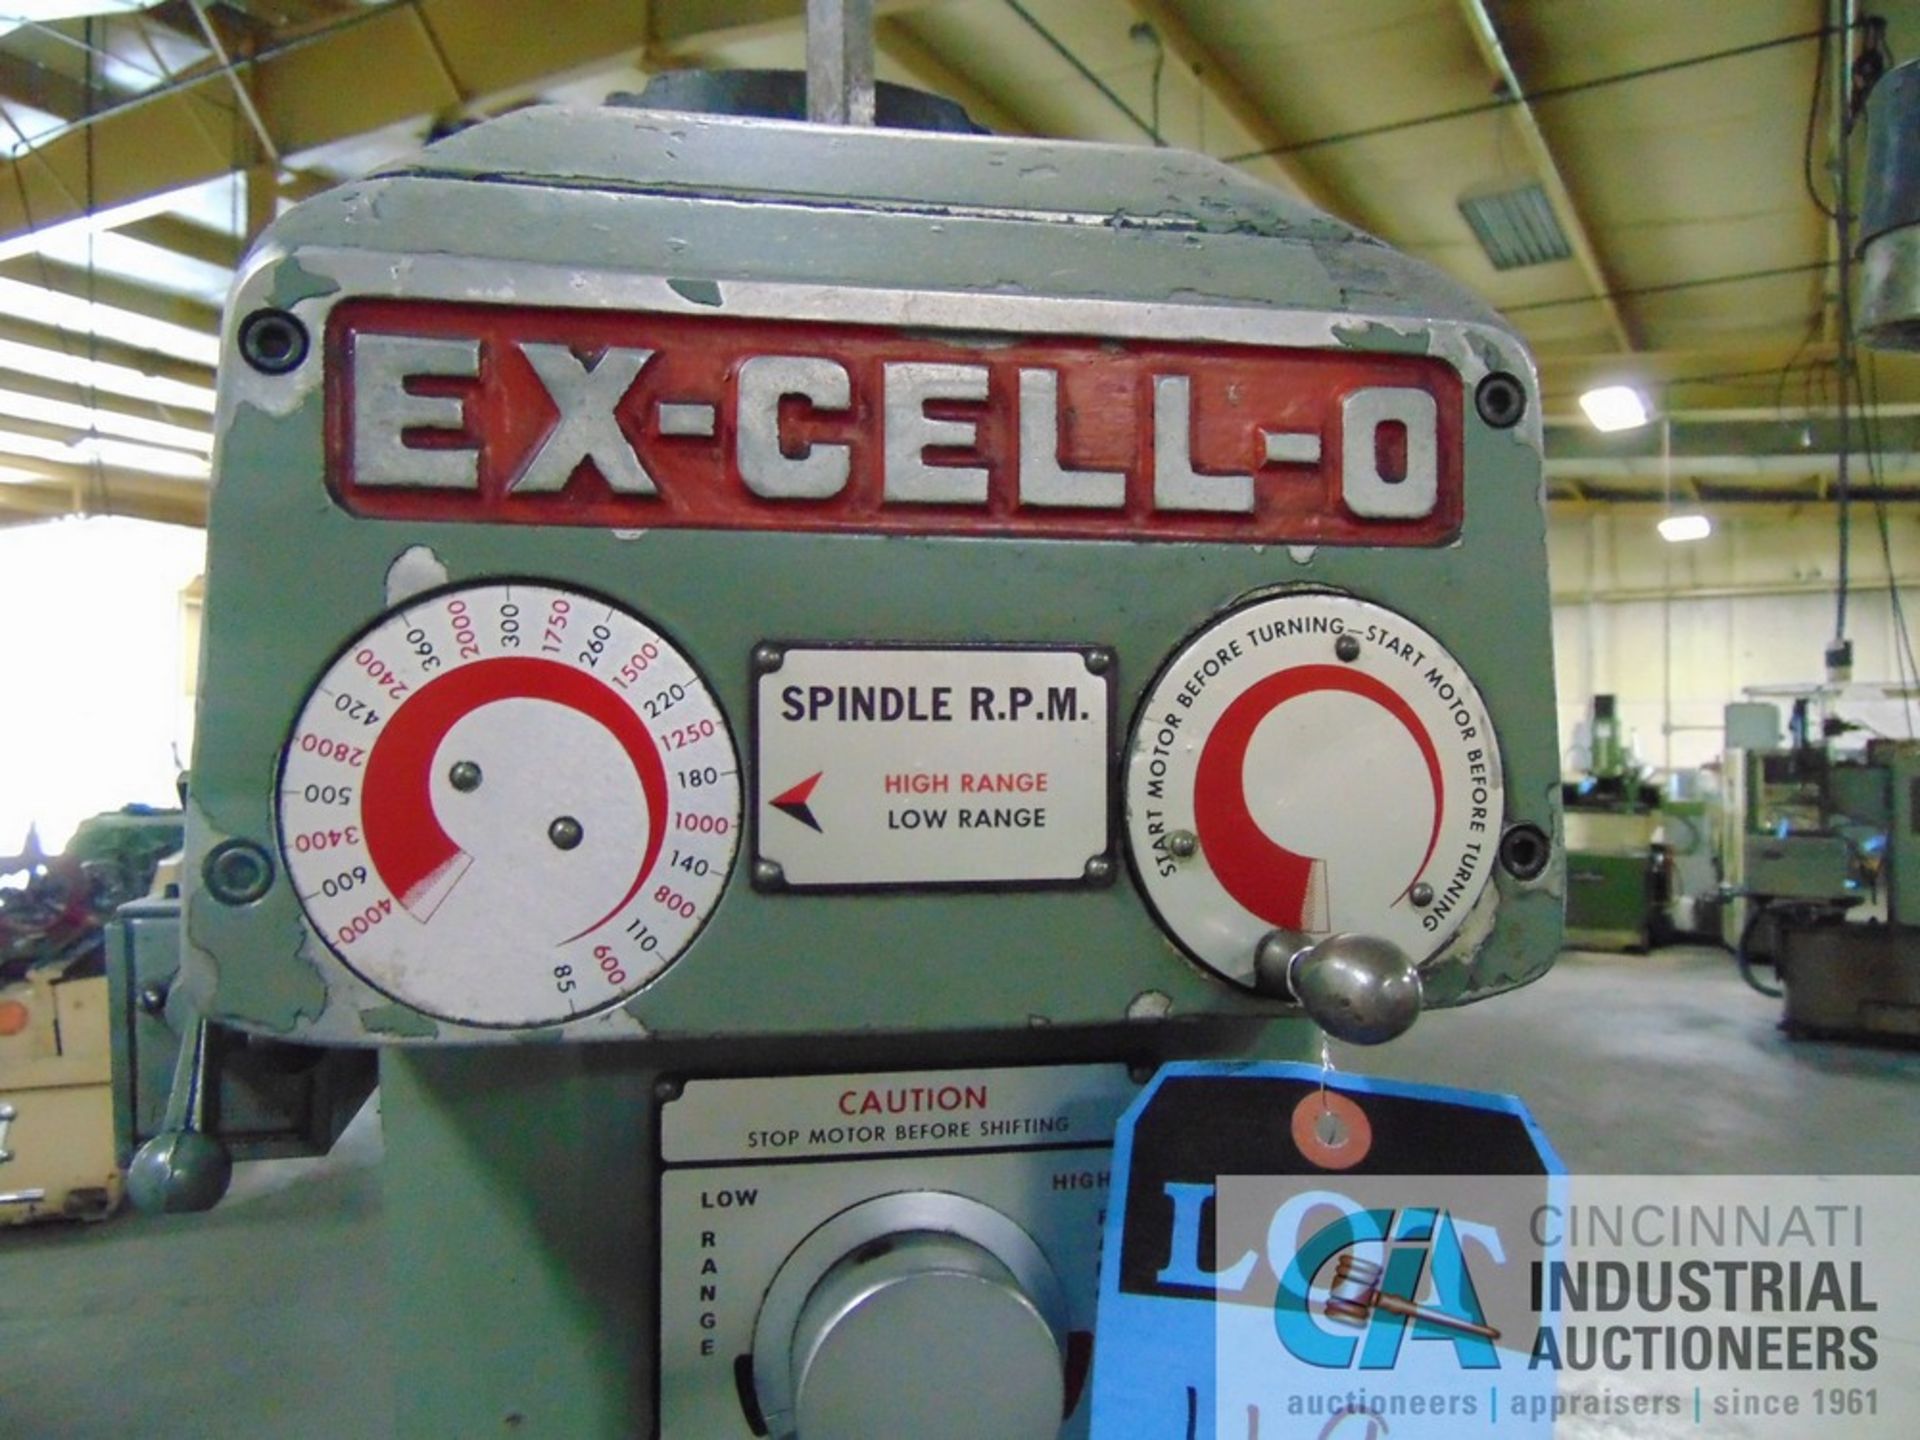 2 HP EX-CELL-O MODEL 602 VERTICAL MILL; S/N 6029179, 9" X 52" TABLE - Image 6 of 6